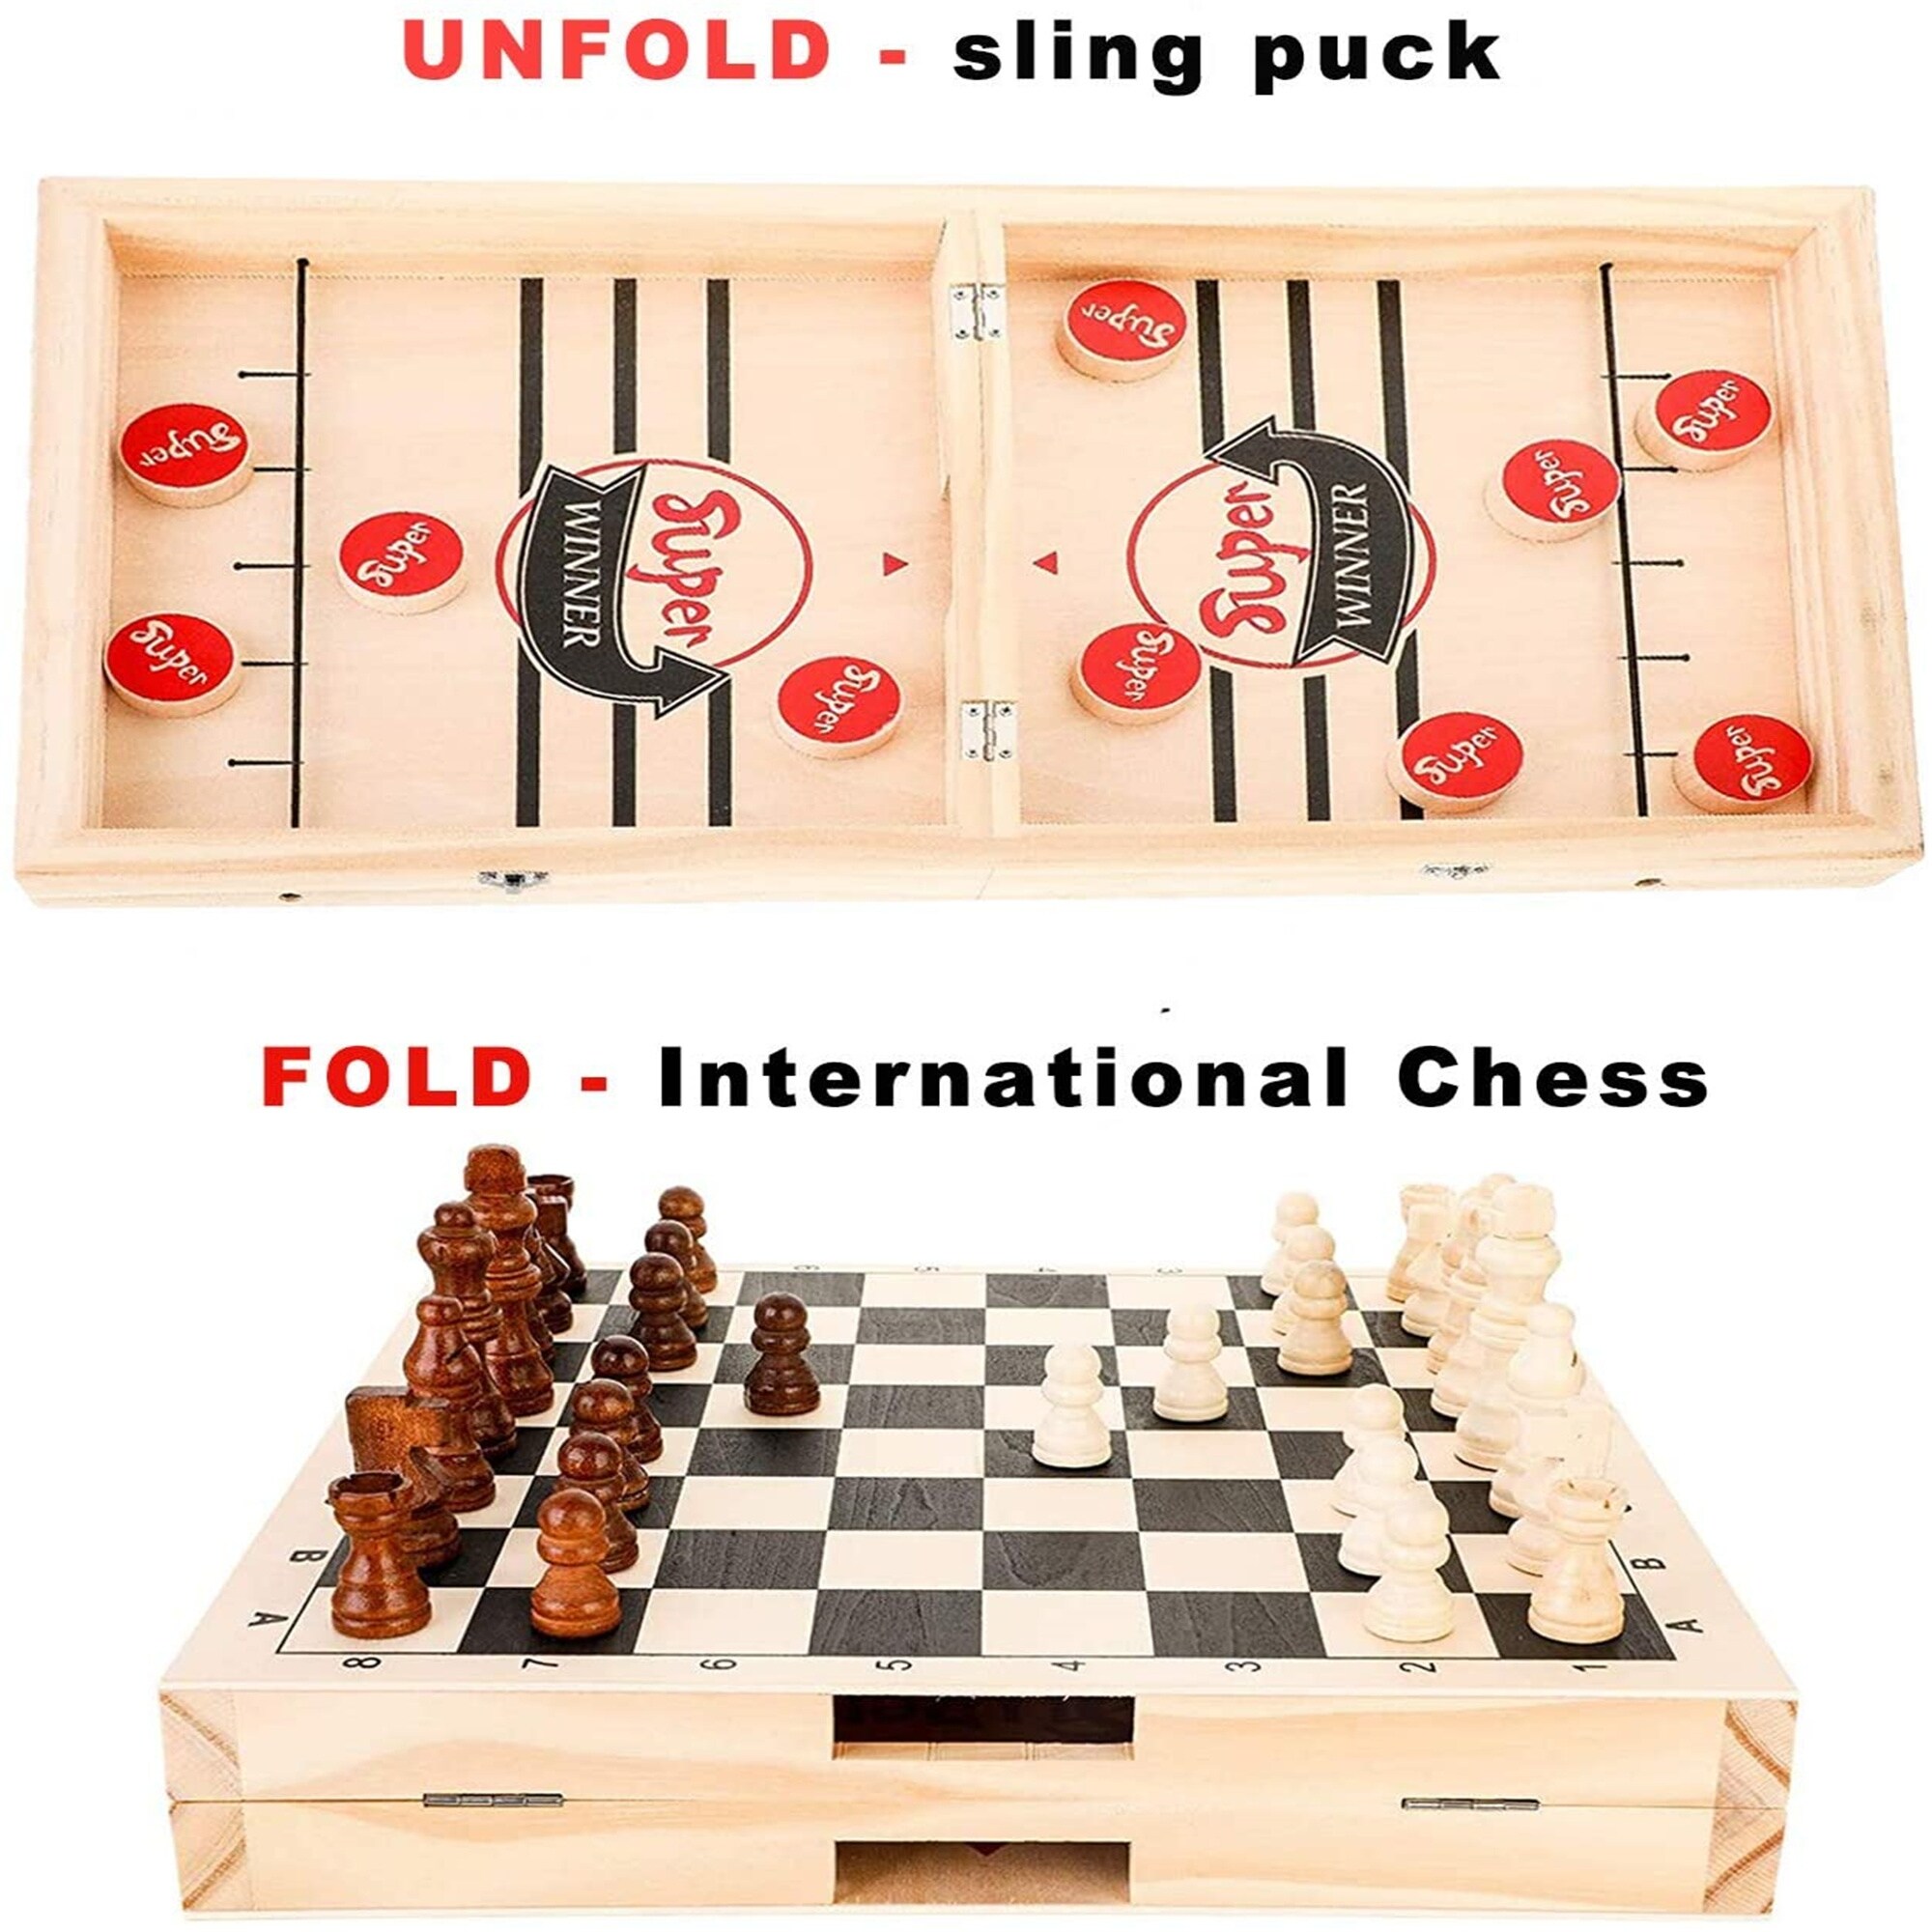 Details about   2 in 1 Folded Fast Sling Puck Game International Chess Foldable 24x12inch